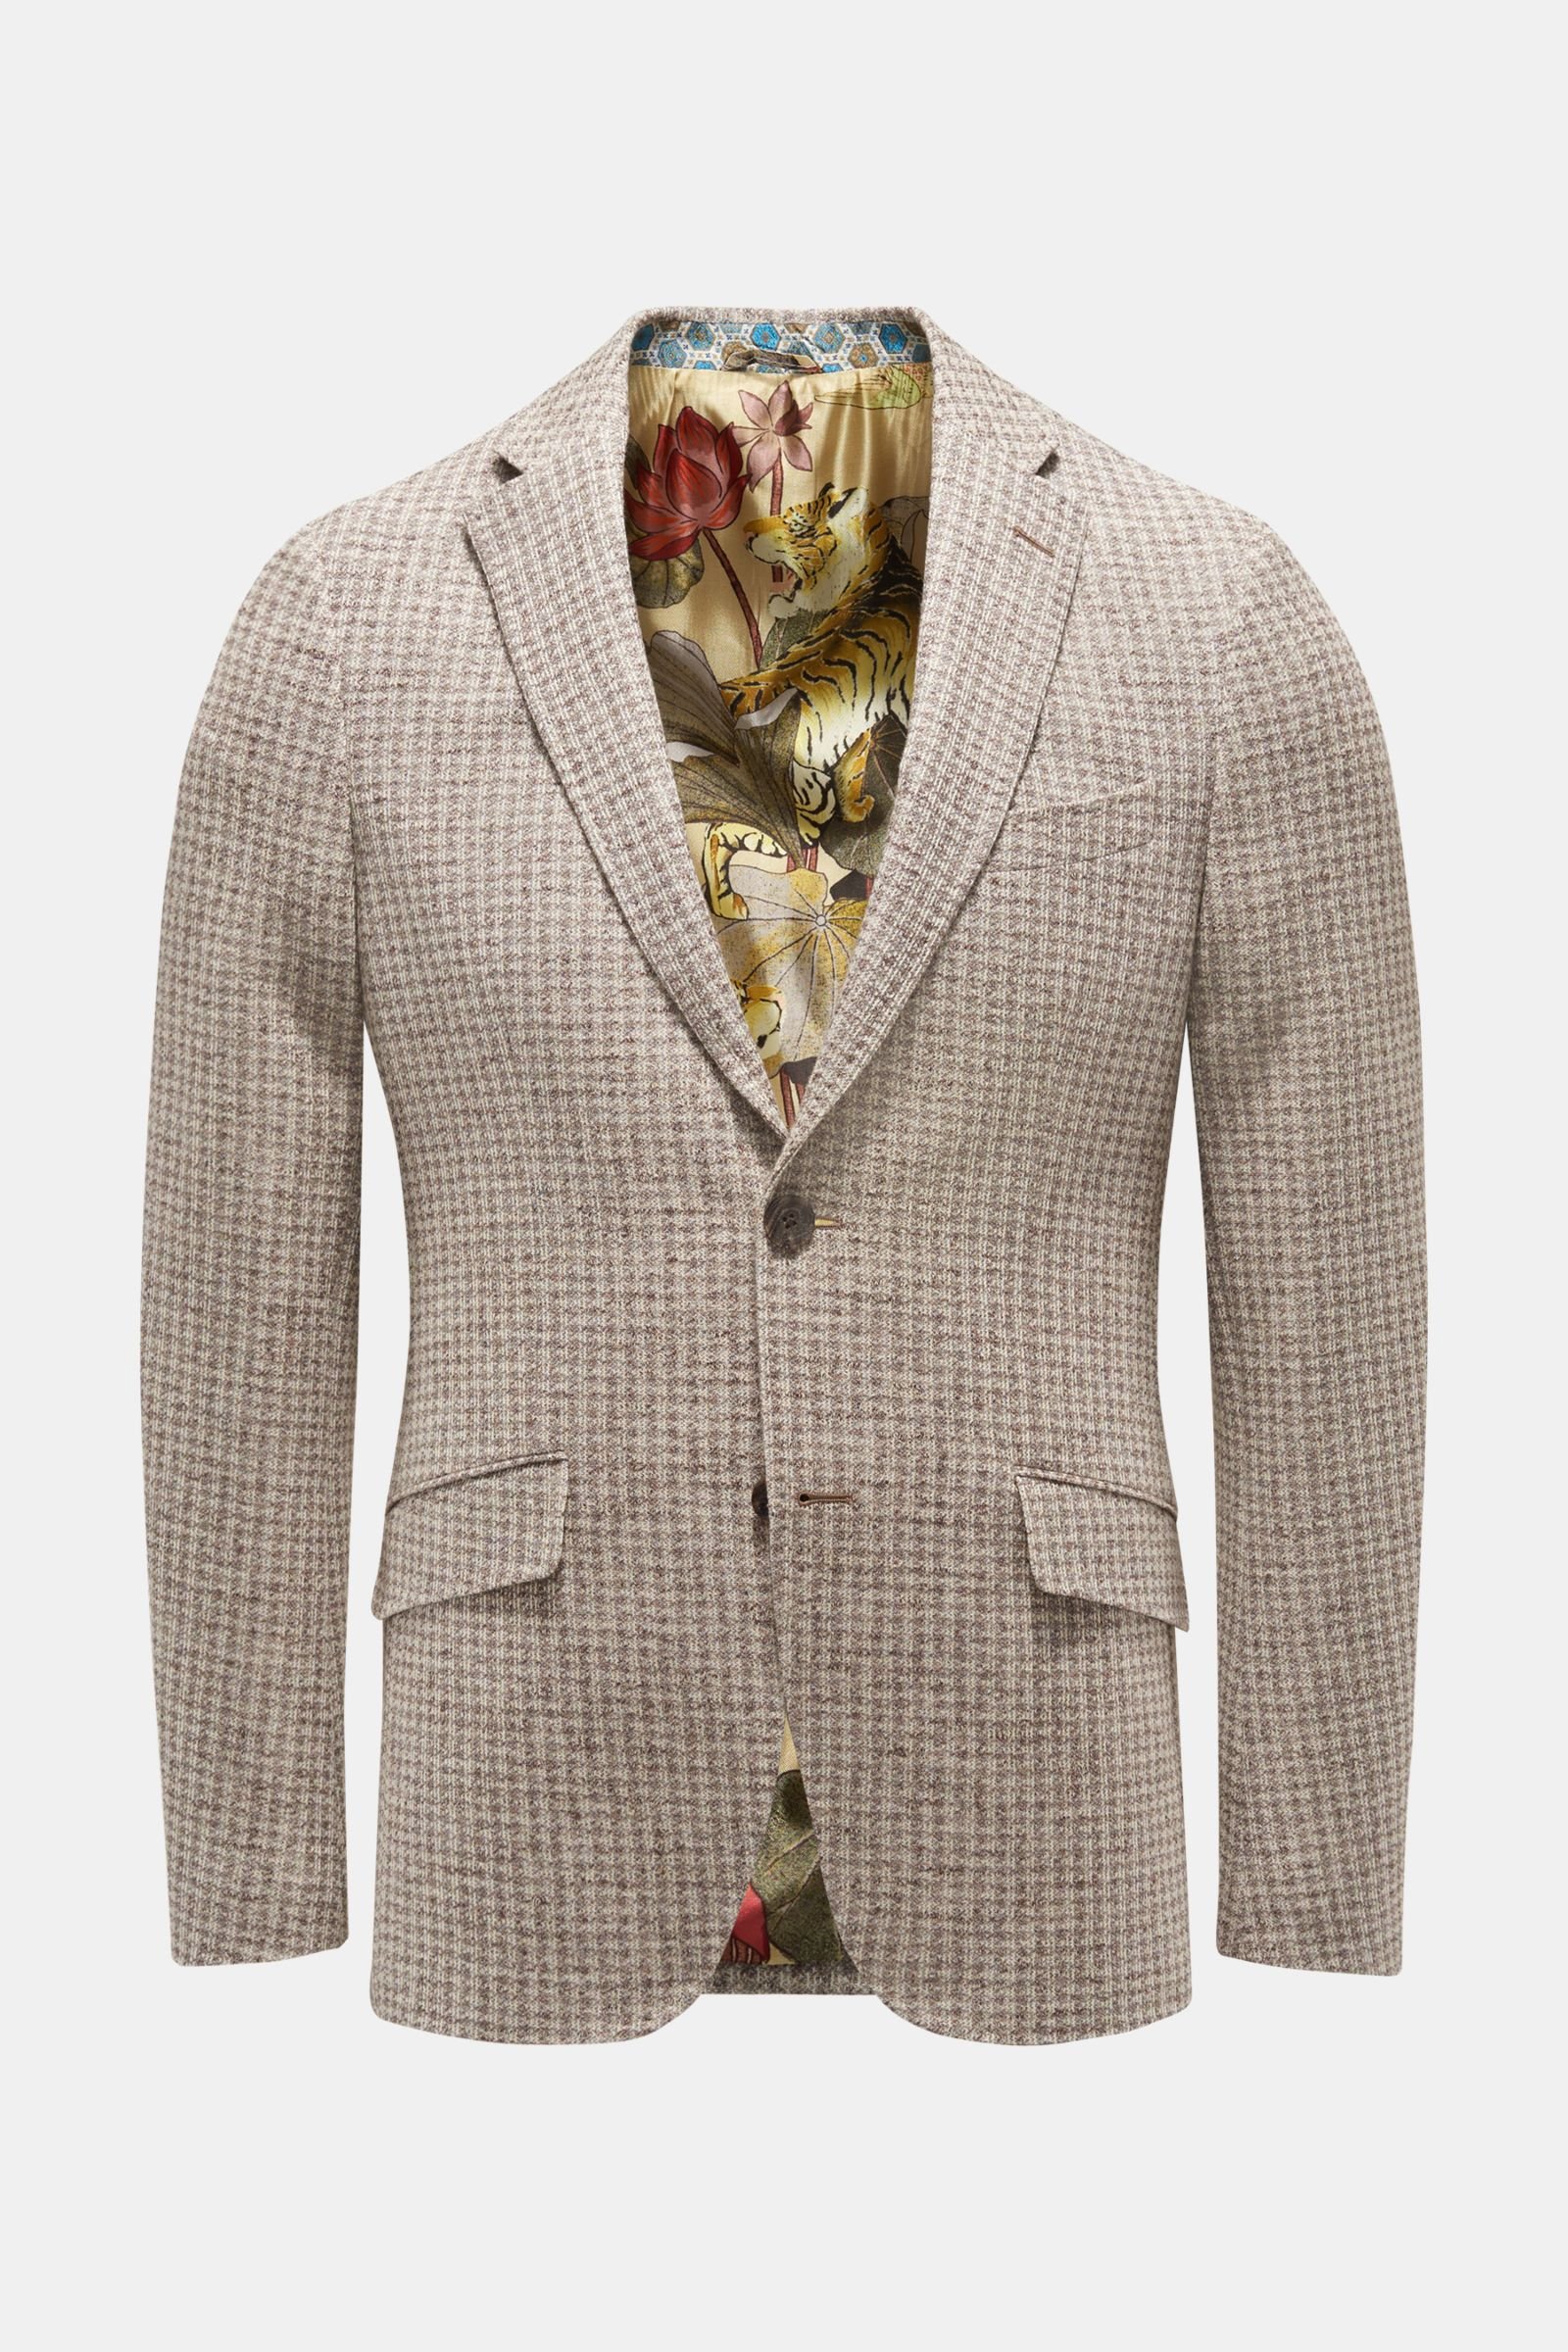 Smart-casual jacket beige/grey-brown checked